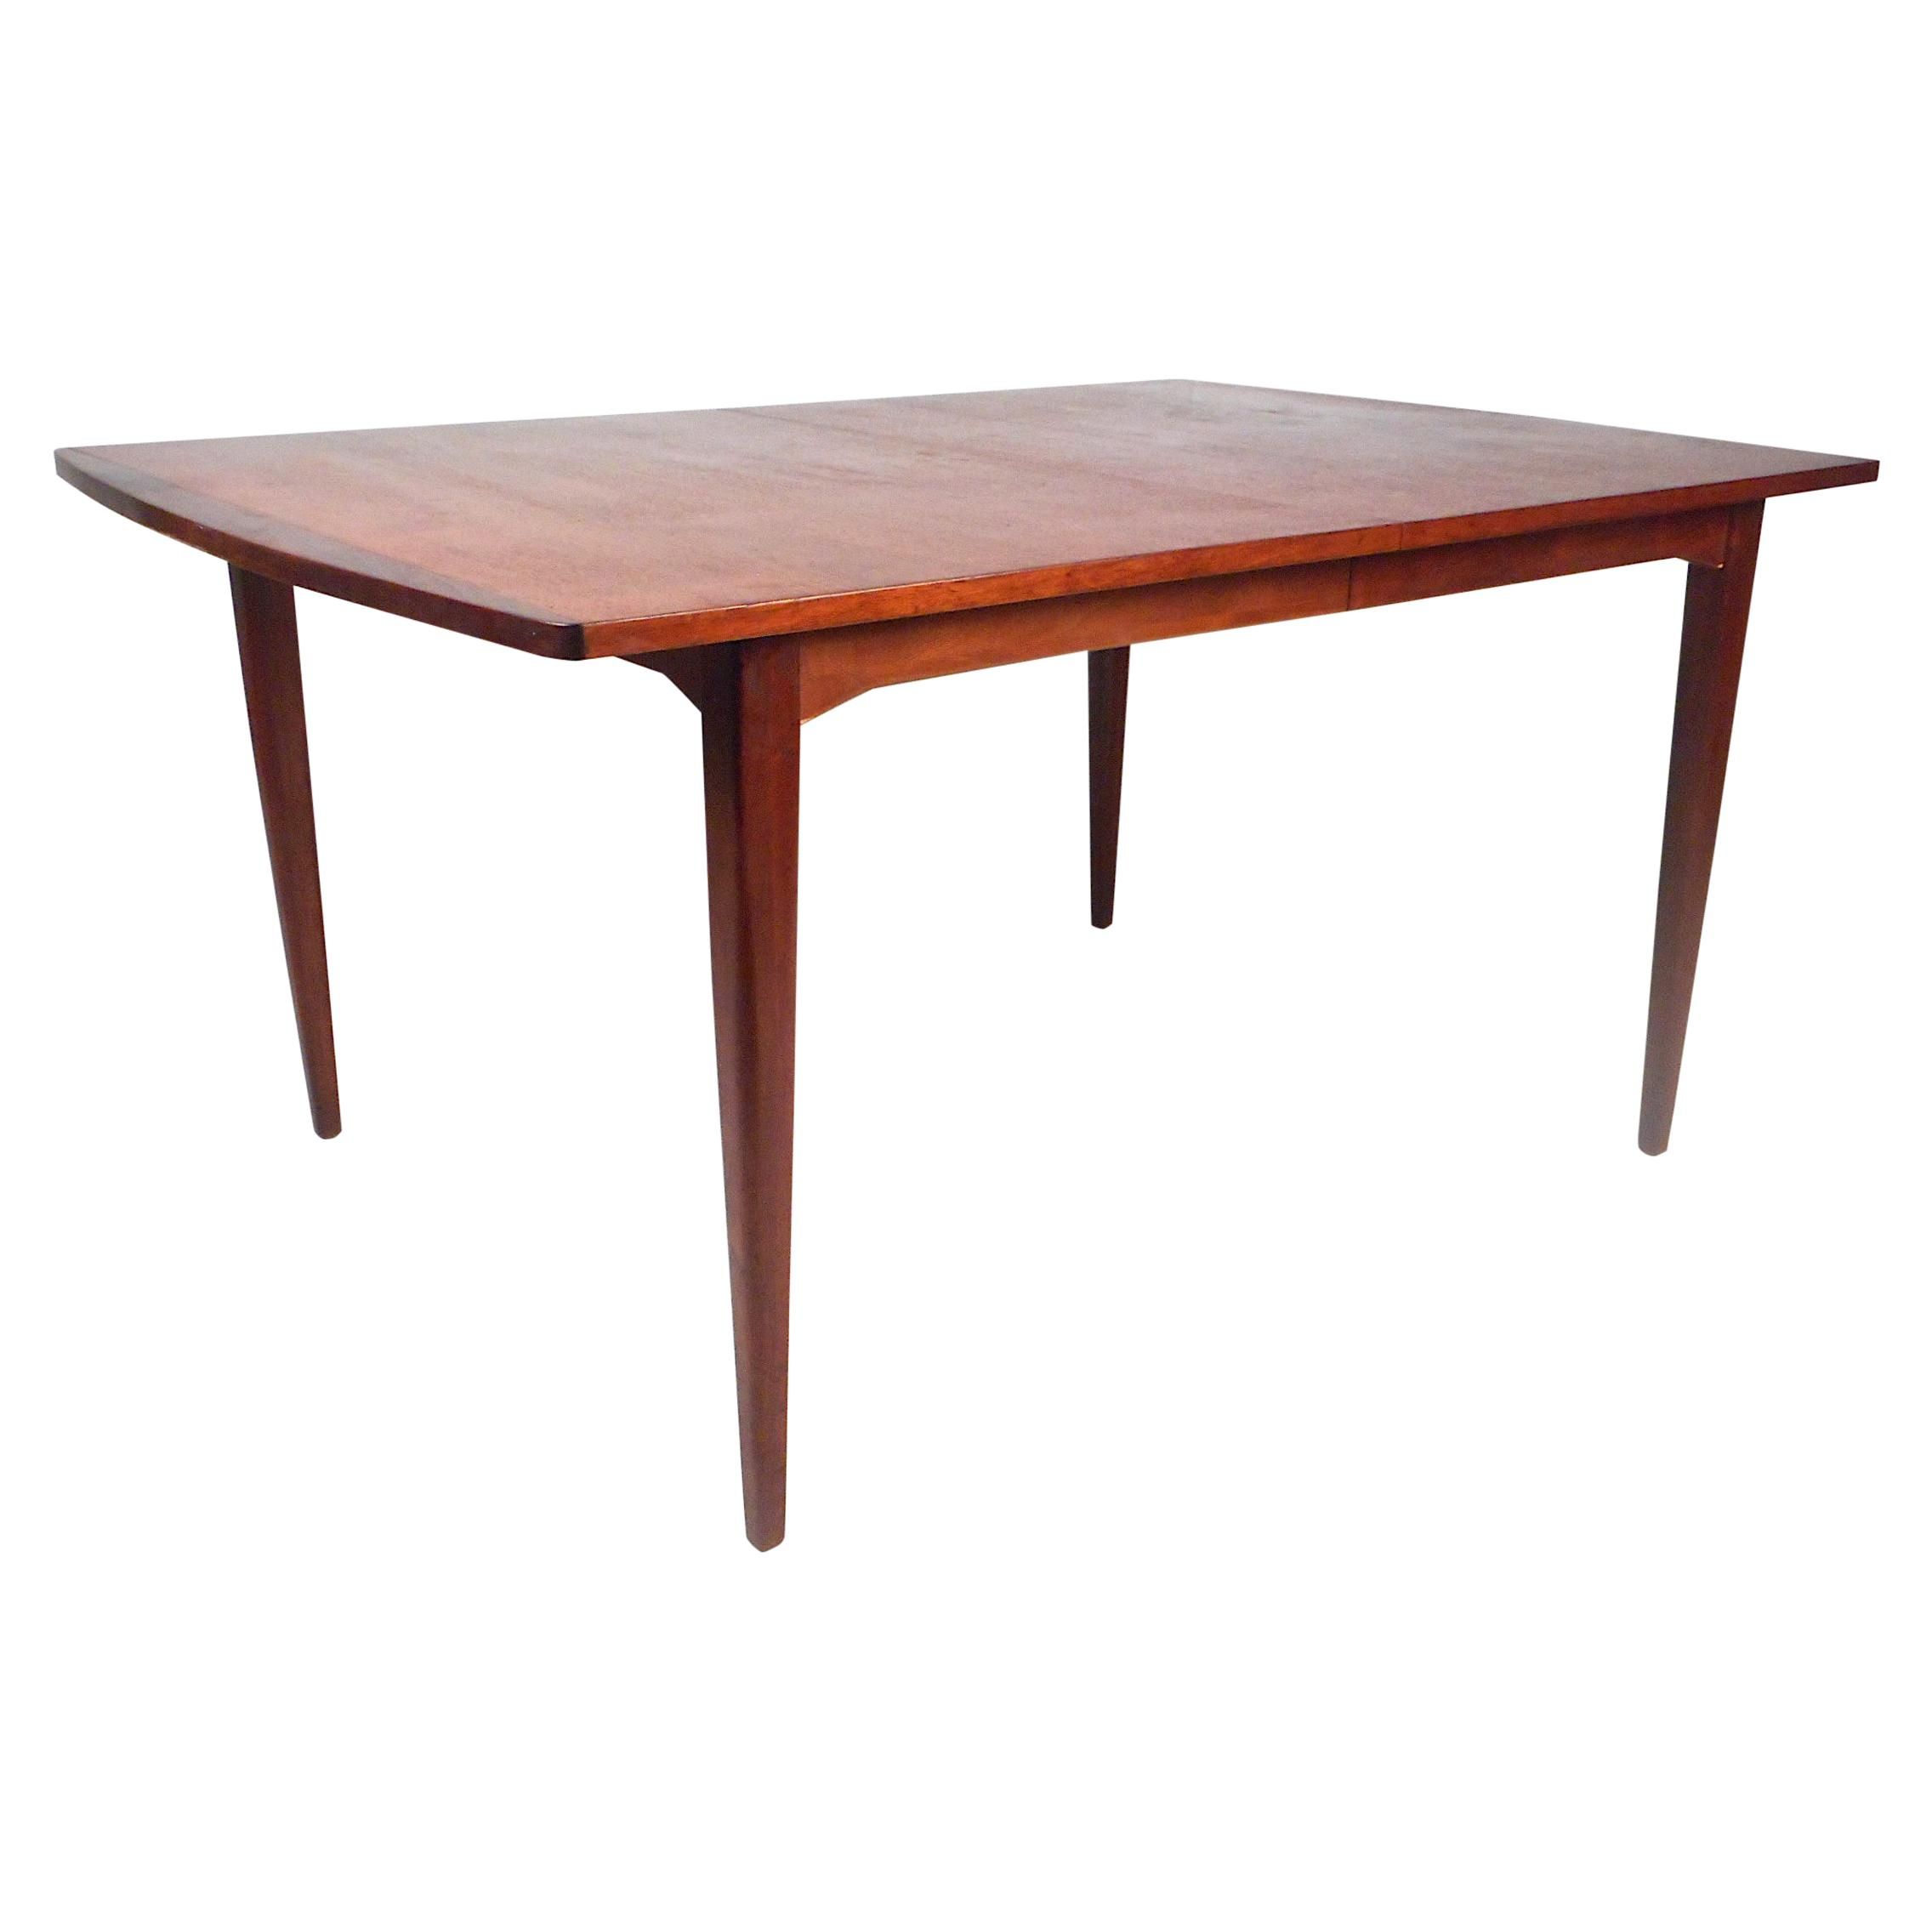 Roly Poly Dining Tablefaye Toogood, Uk, 2018 Within Most Popular Faye Dining Tables (View 13 of 25)